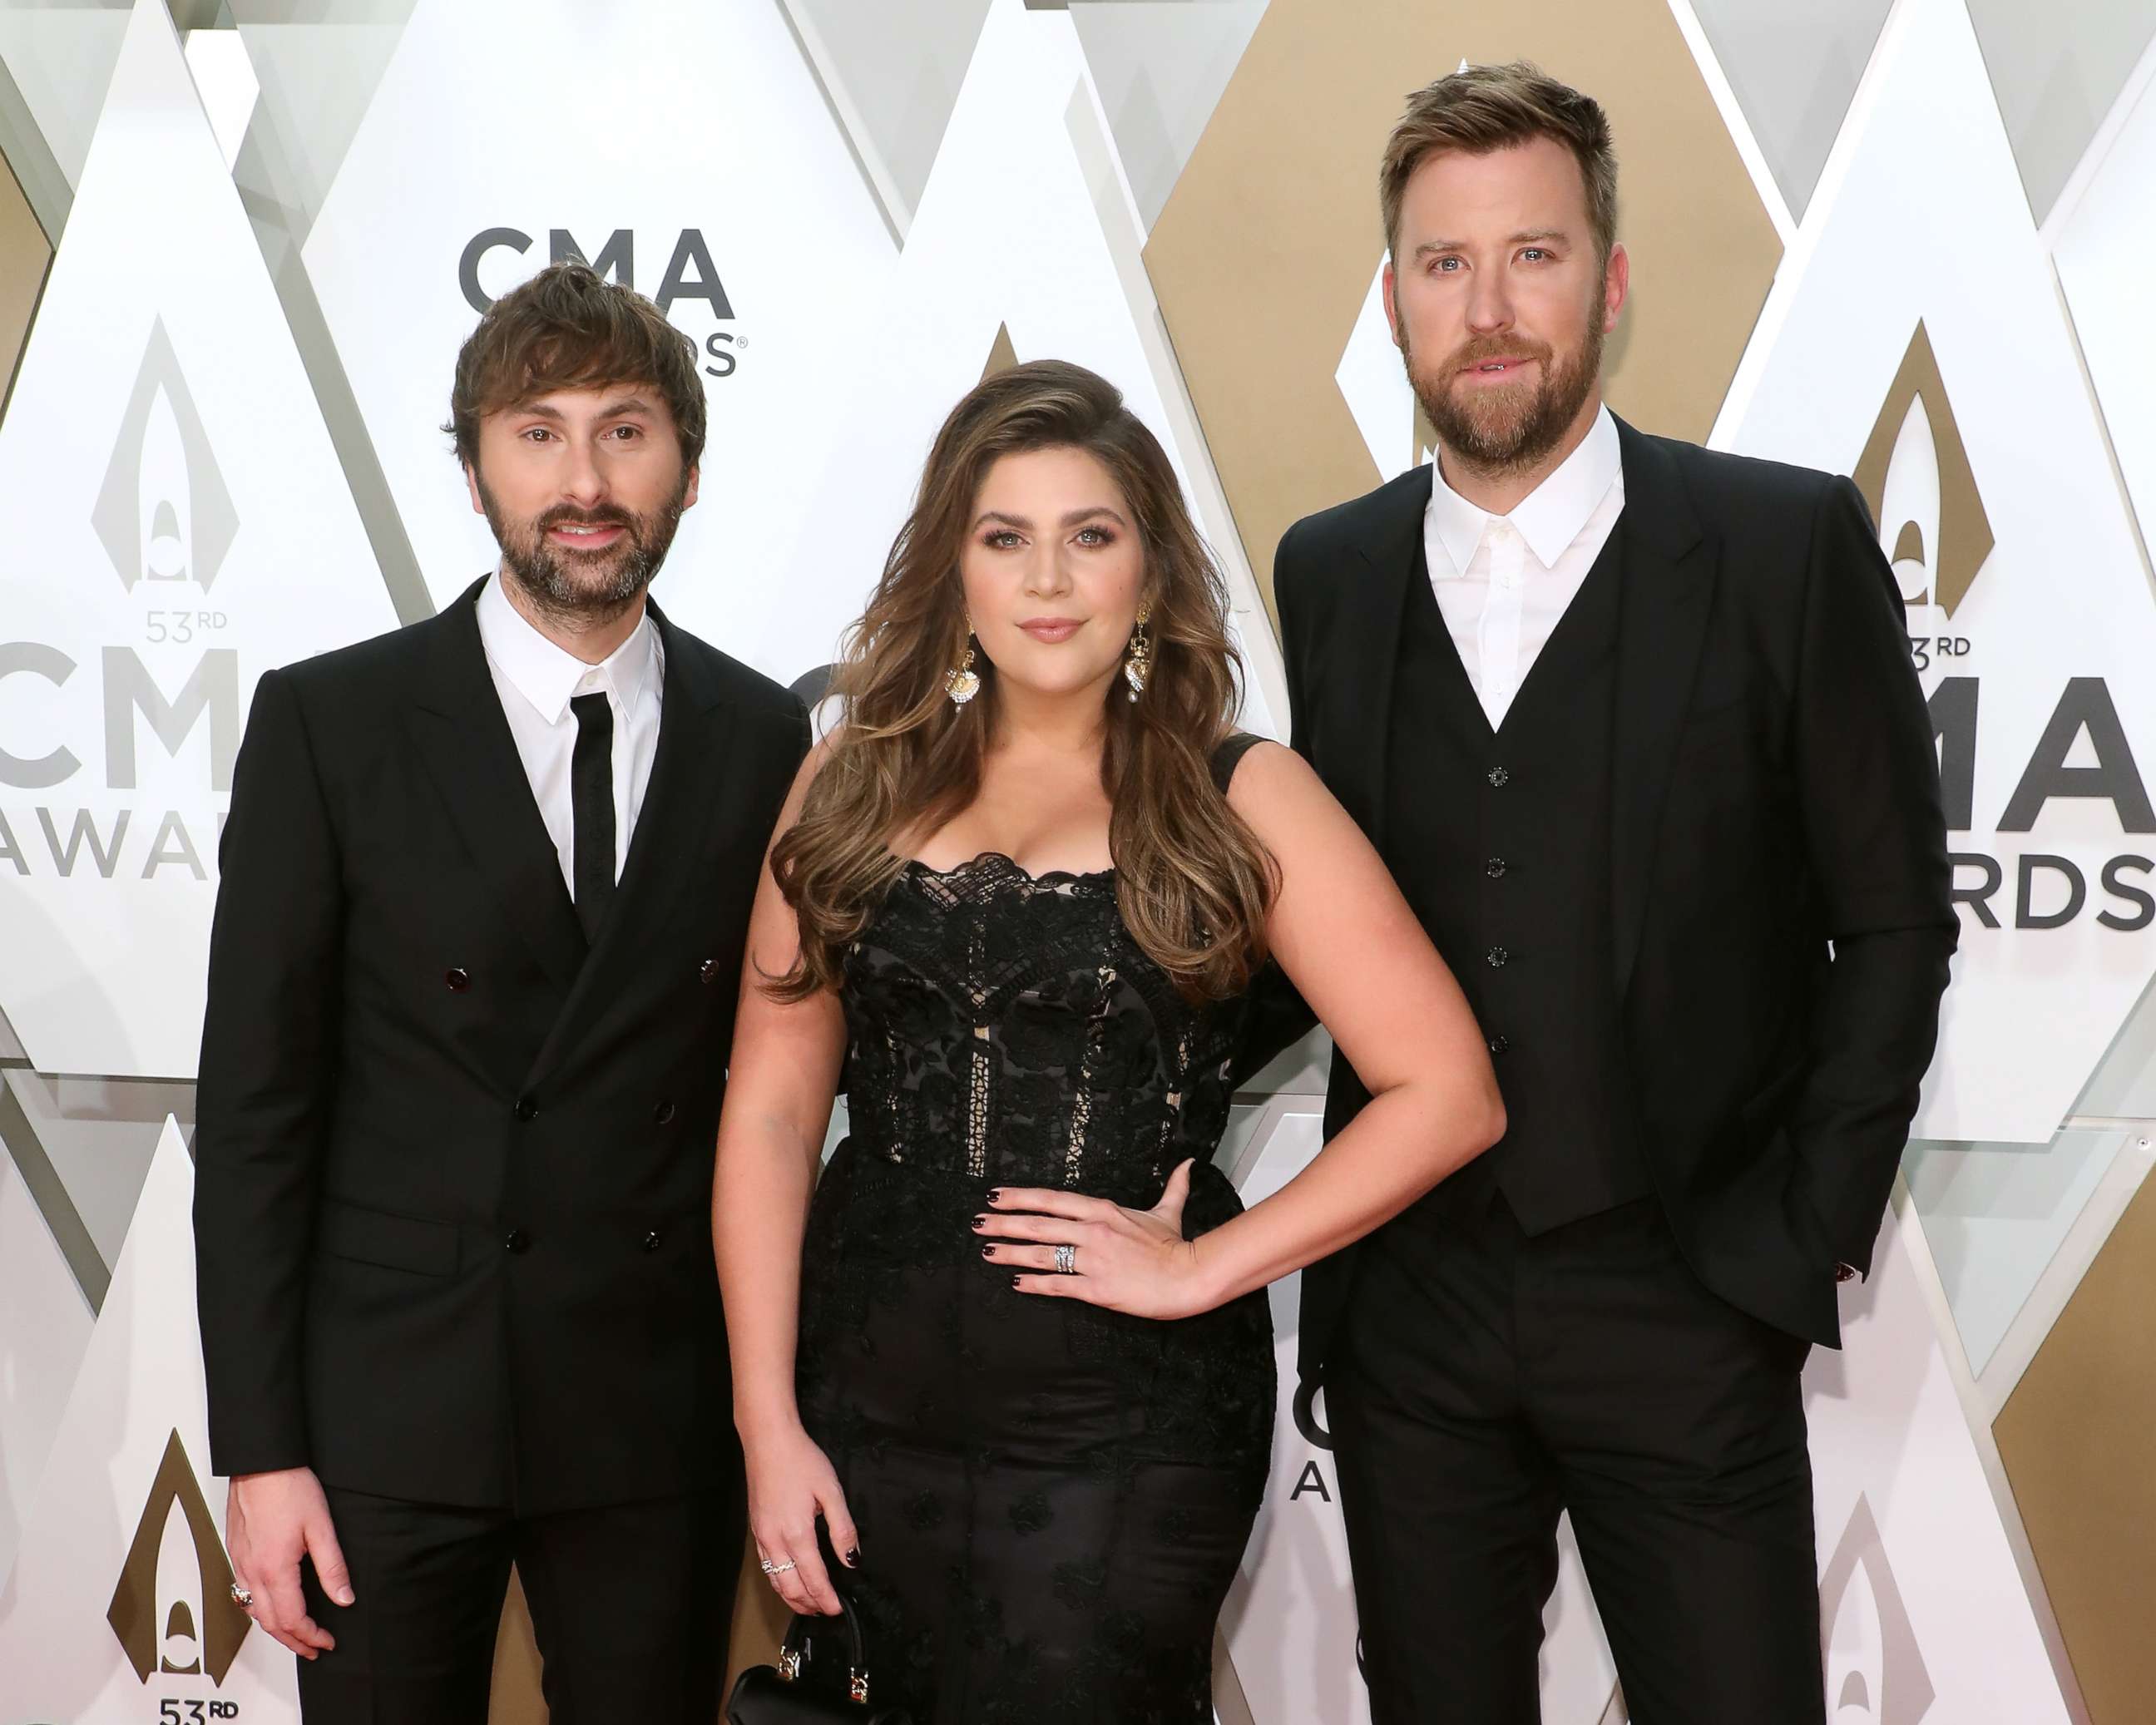 PHOTO: Dave Haywood, Hillary Scott, and Charles Kelley of Lady Antebellum attend the 53nd annual CMA Awards at Bridgestone Arena on November 13, 2019 in Nashville, Tennessee.